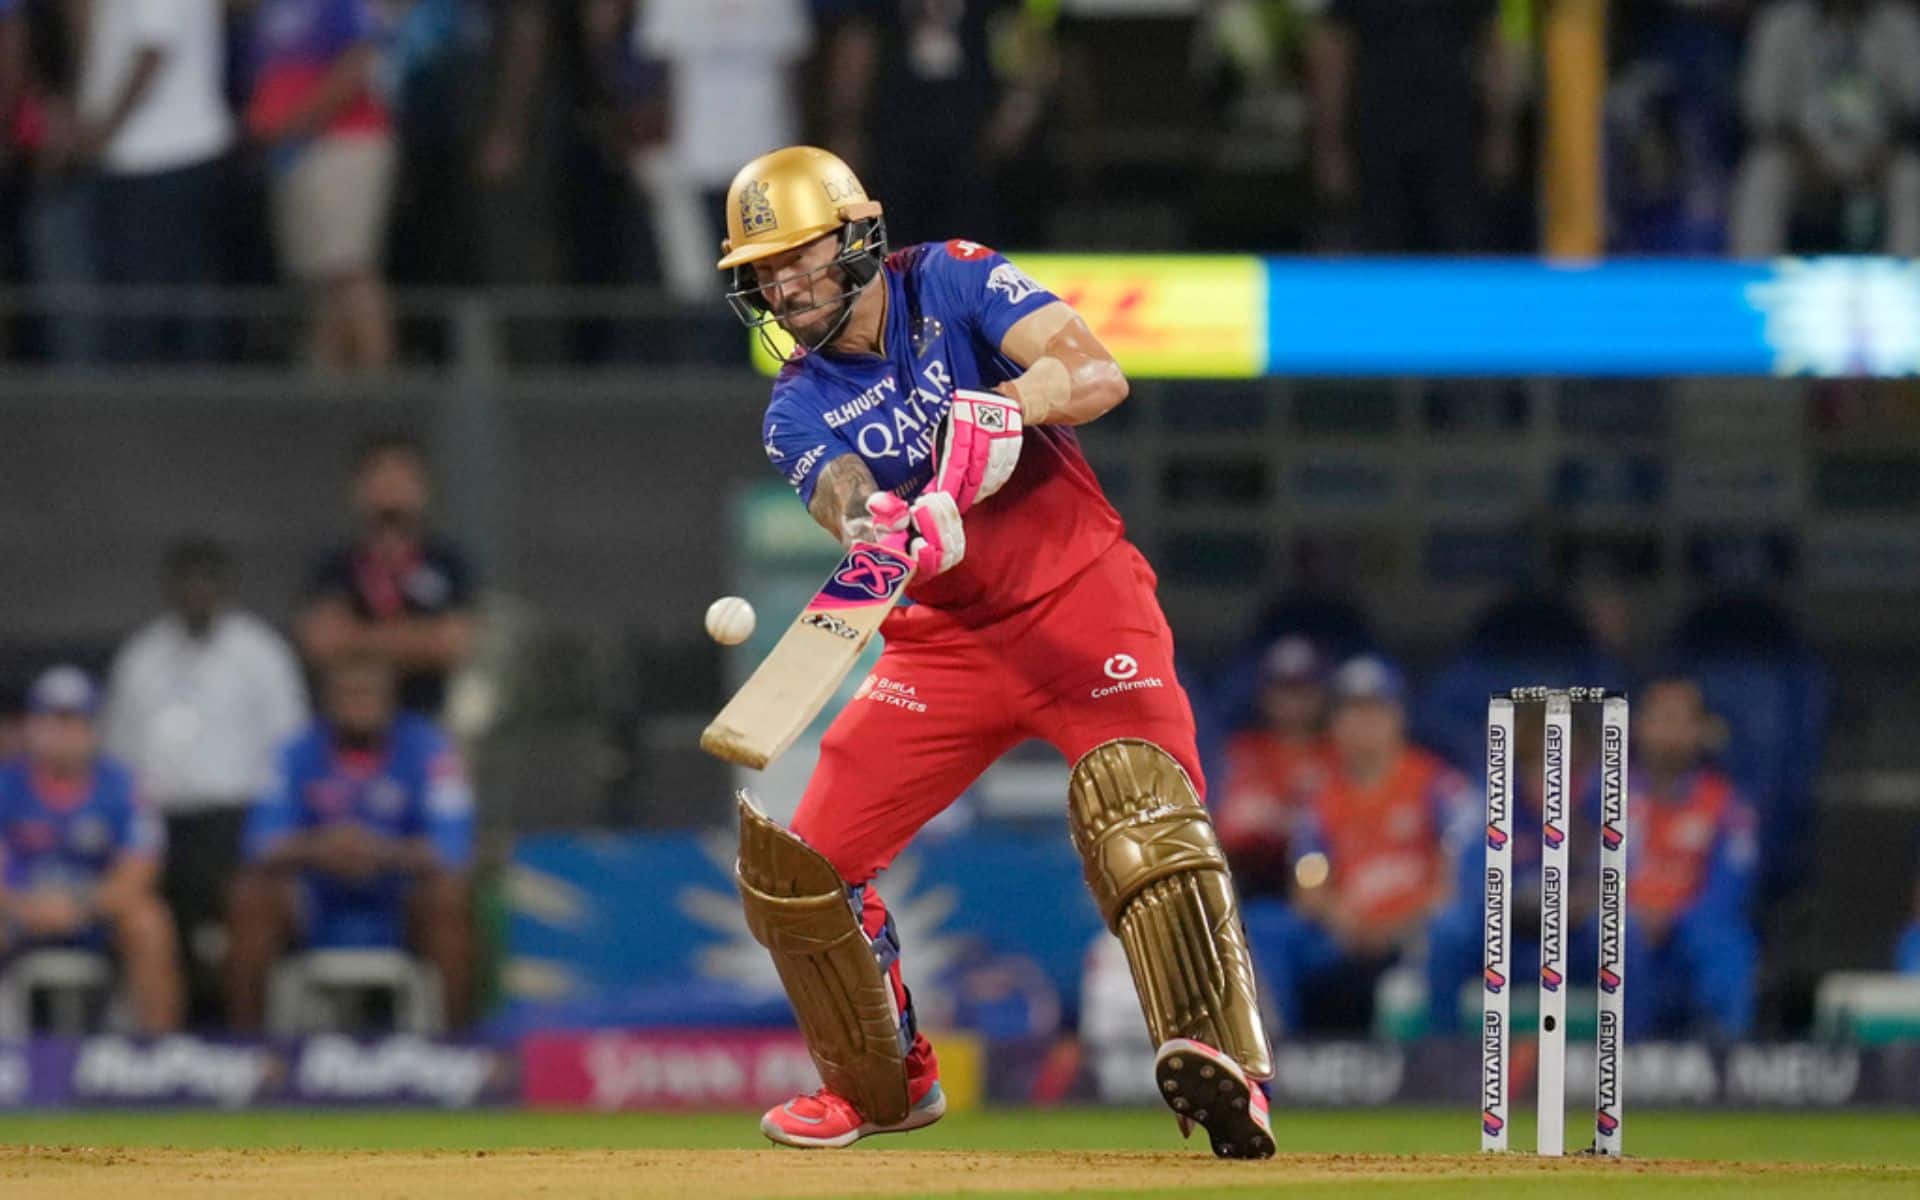 'Tough Pill To Swallow' - Faf Du Plessis Points To Toss Result After RCB's Shameful Loss Vs MI